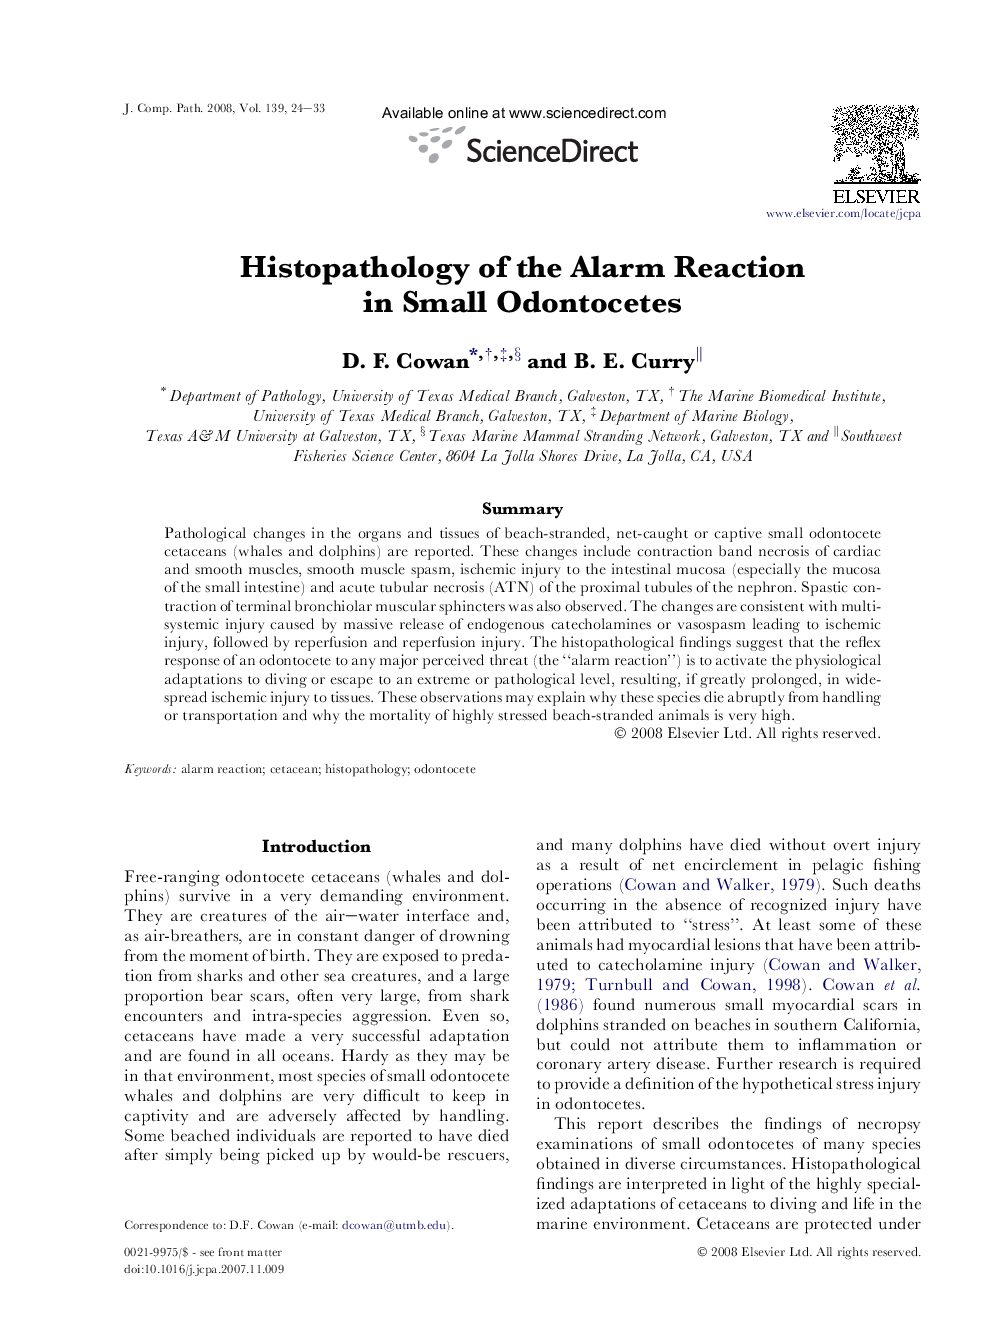 Histopathology of the Alarm Reaction in Small Odontocetes